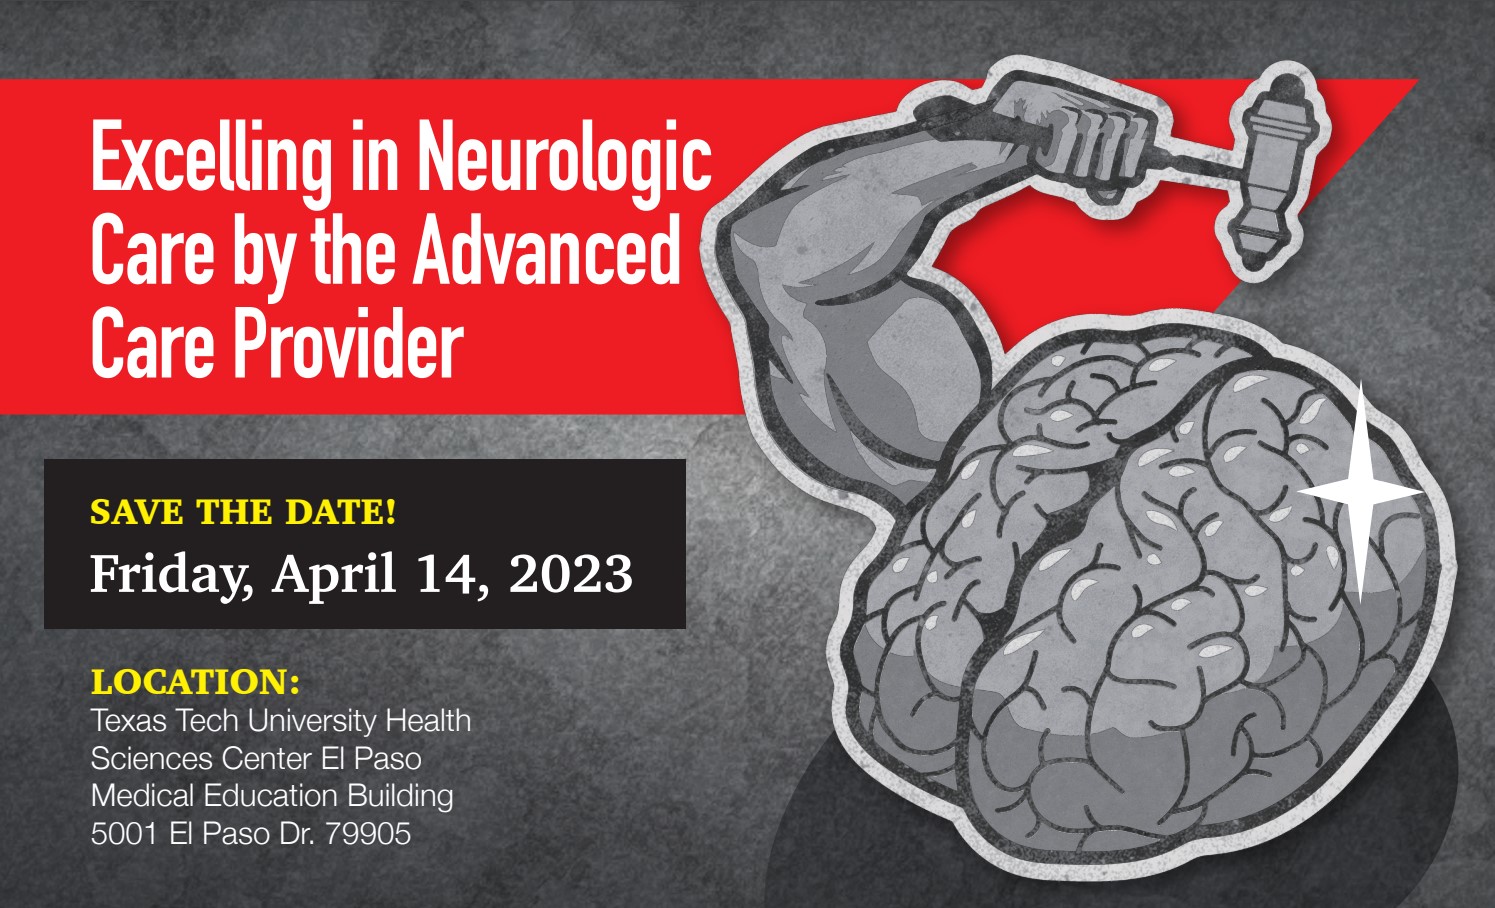 Excelling in Neurologic Care by the Advanced Care Provider